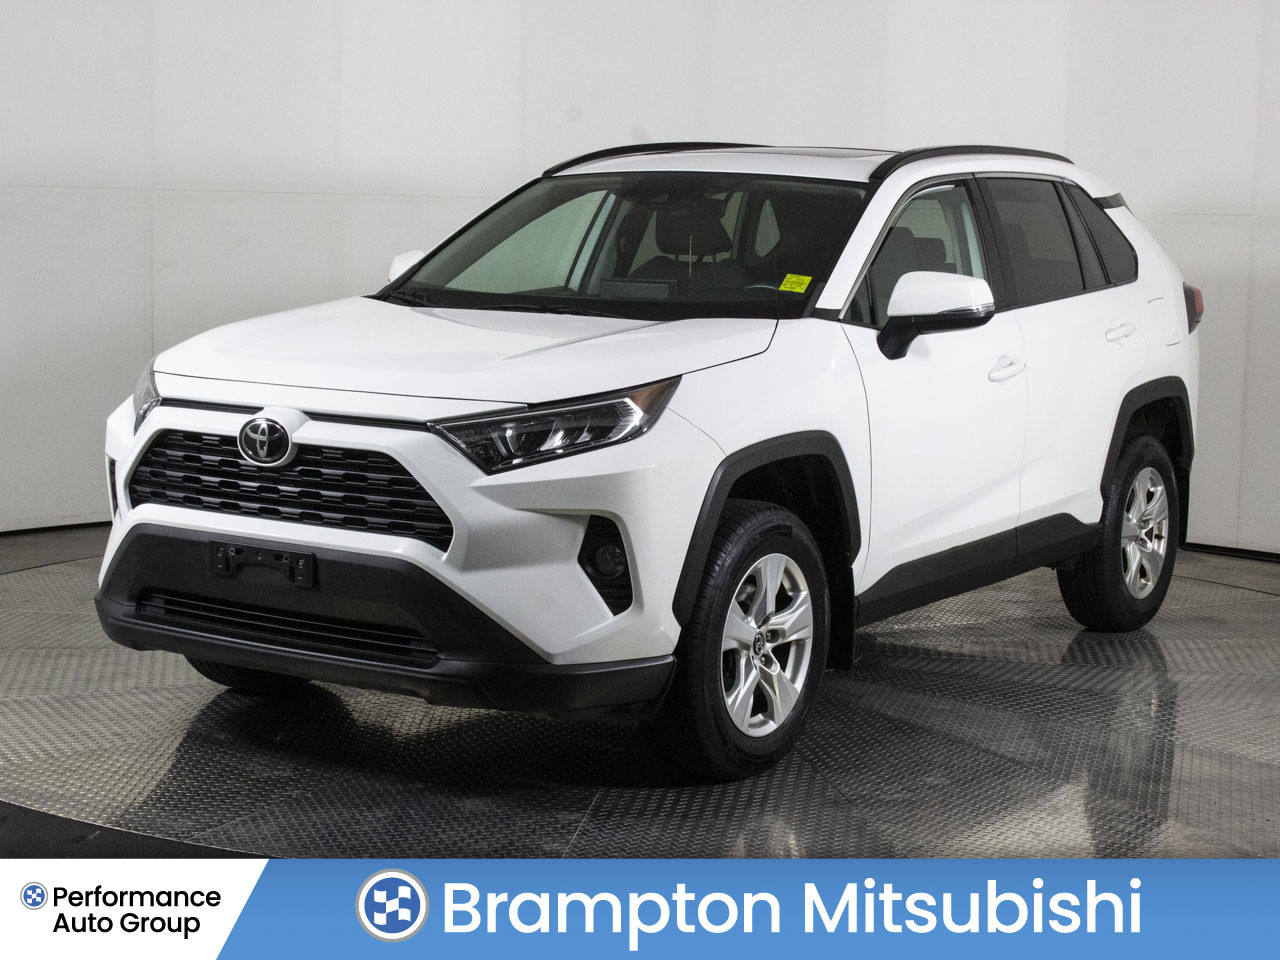 2019 Toyota RAV4 XLE AWD| SUNROOF| PWR DRIVER SEAT| PWR TAILGATE